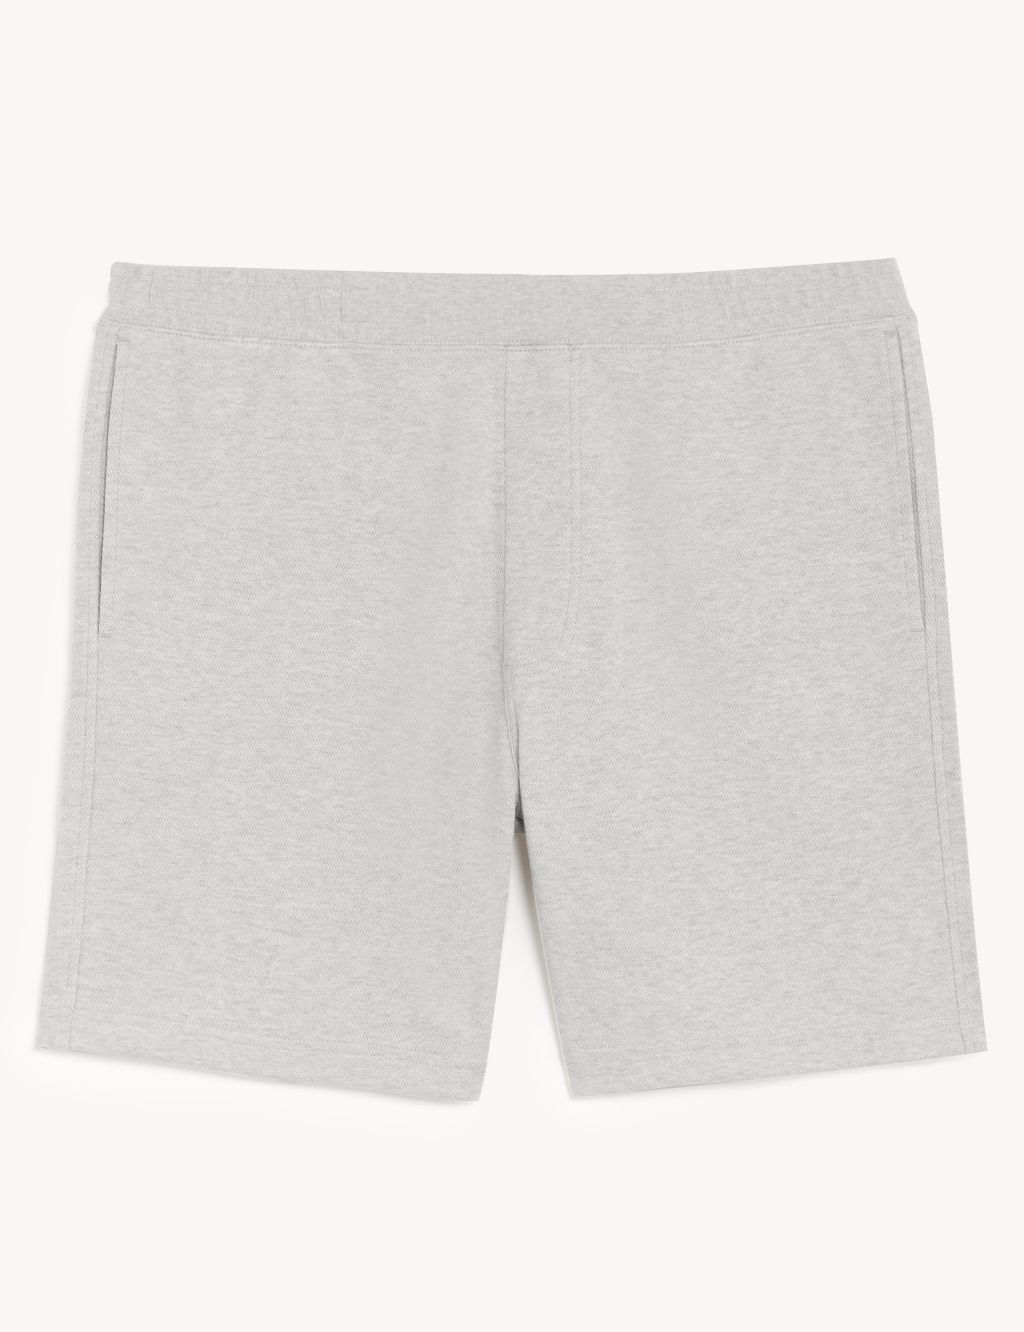 Textured Pure Cotton Jersey Shorts image 2